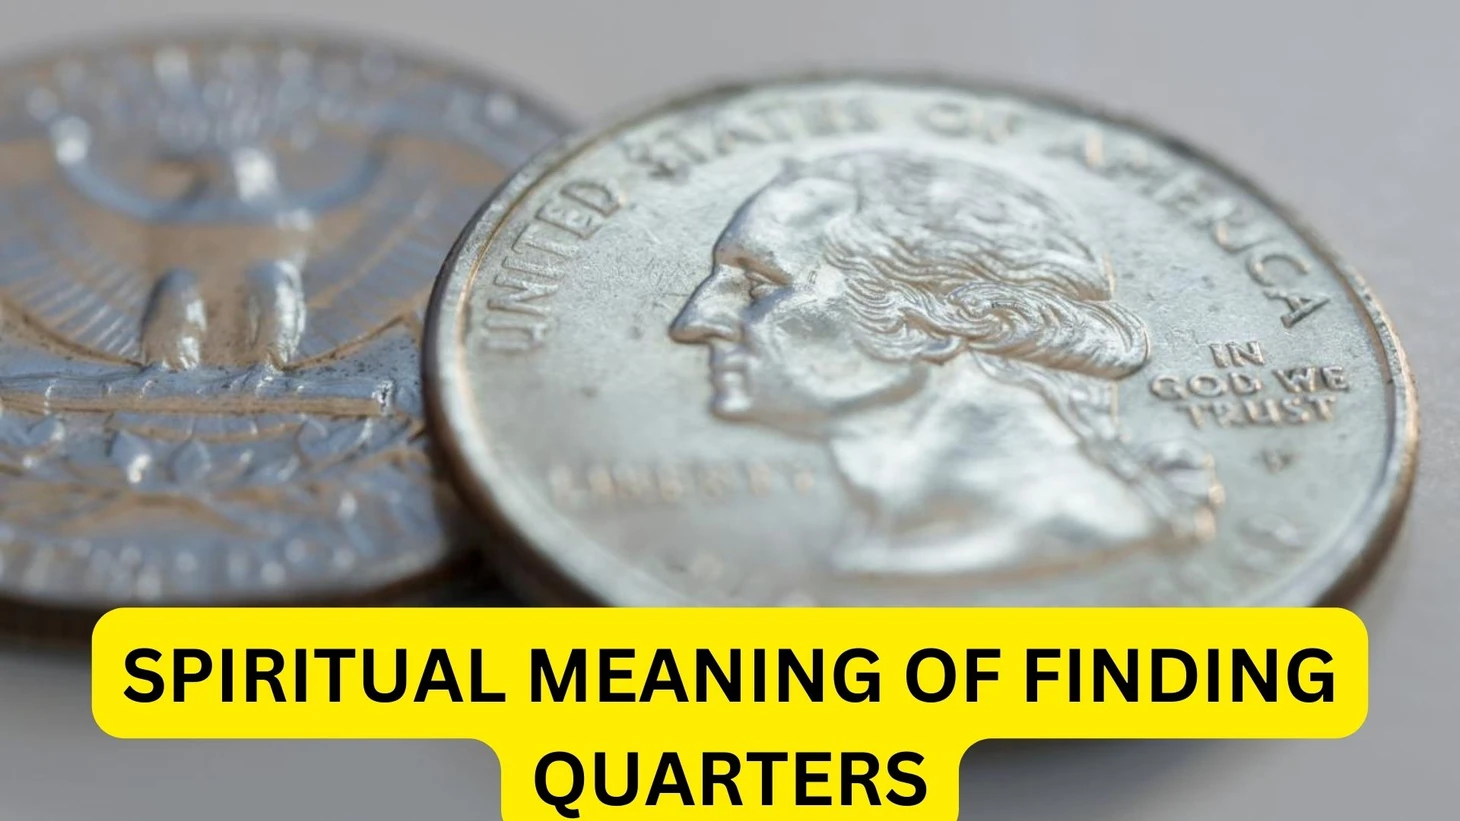 How To Interpret Finding Quarters In Dreams